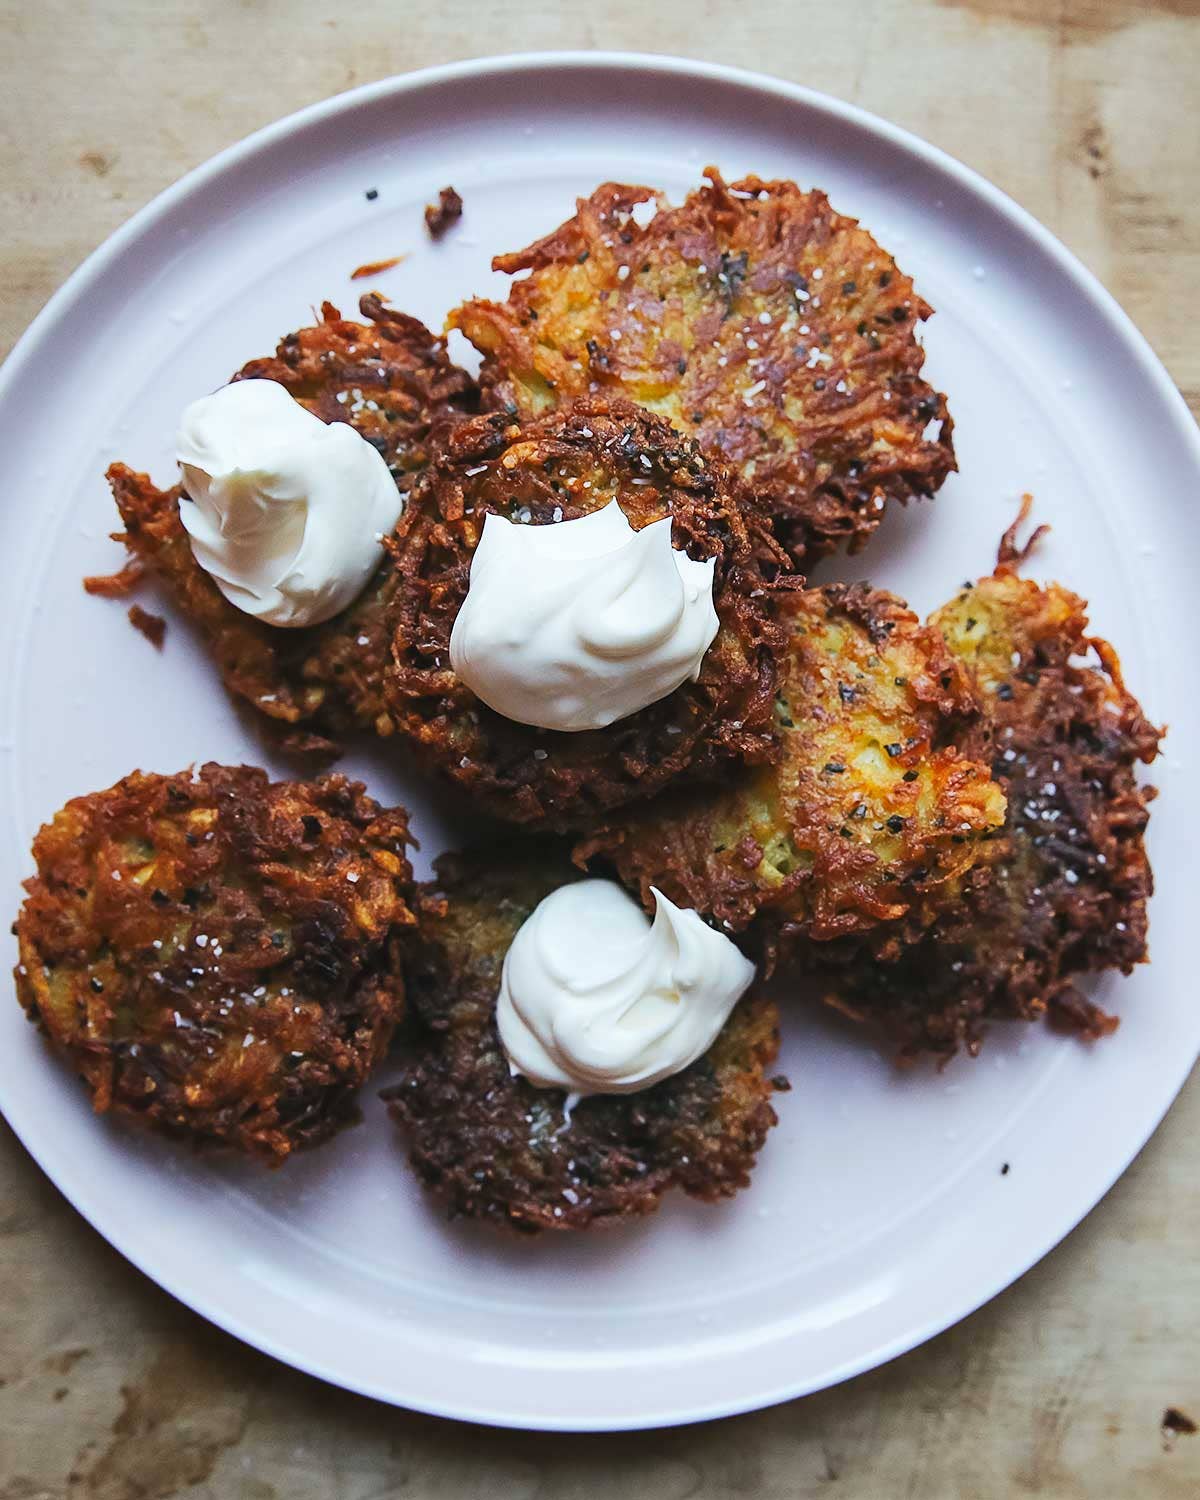 The Step-by-Step Guide to the Perfect, Golden-Brown Hanukkah Latkes